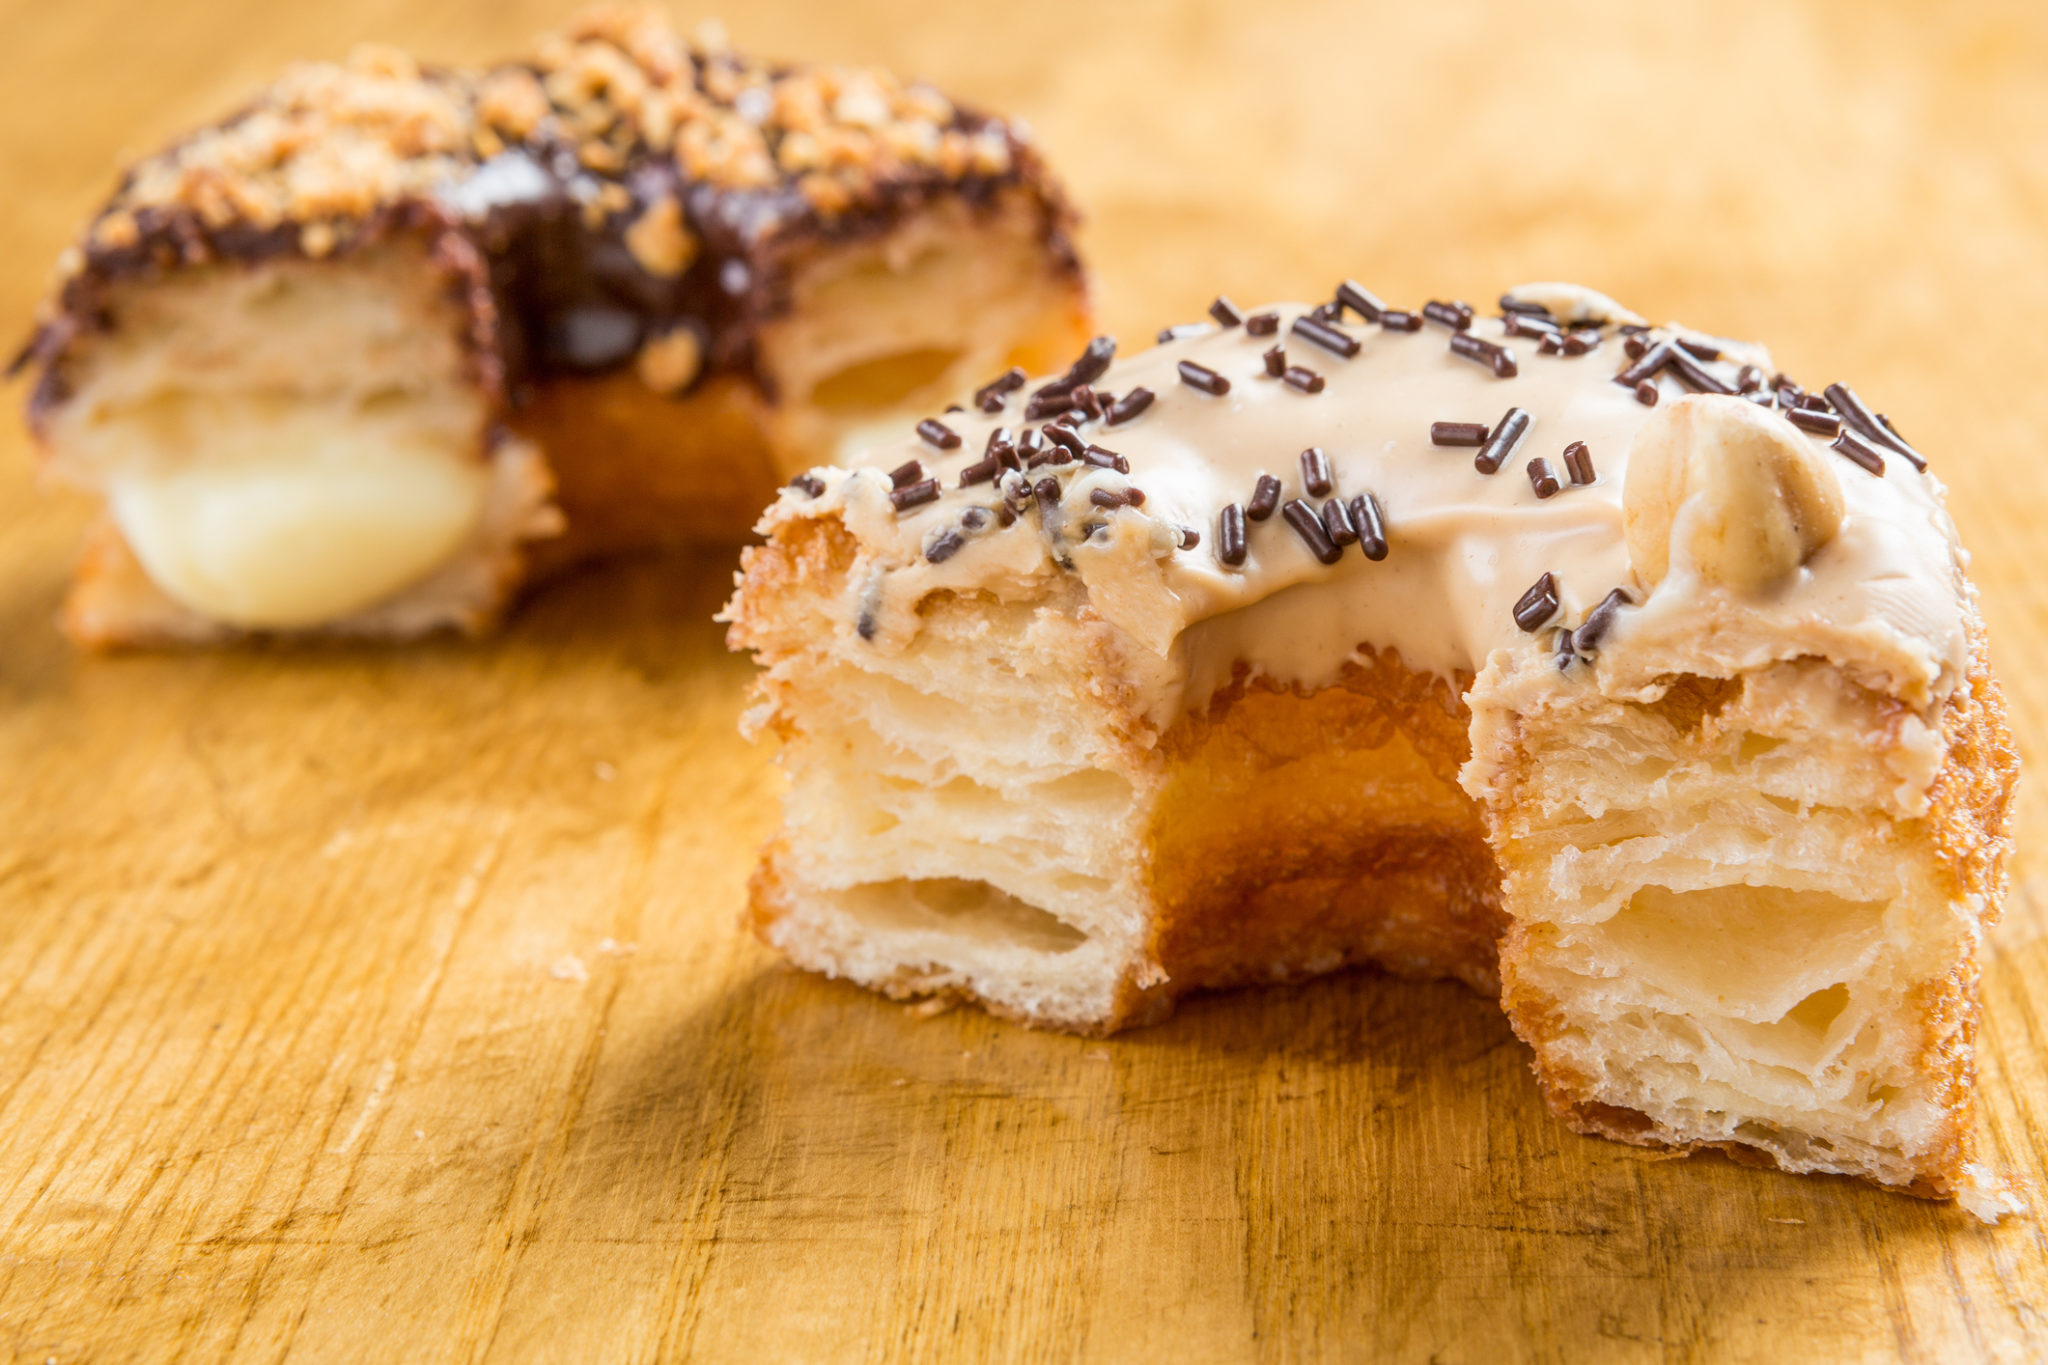 The cronut is one of the world's top viral foods.